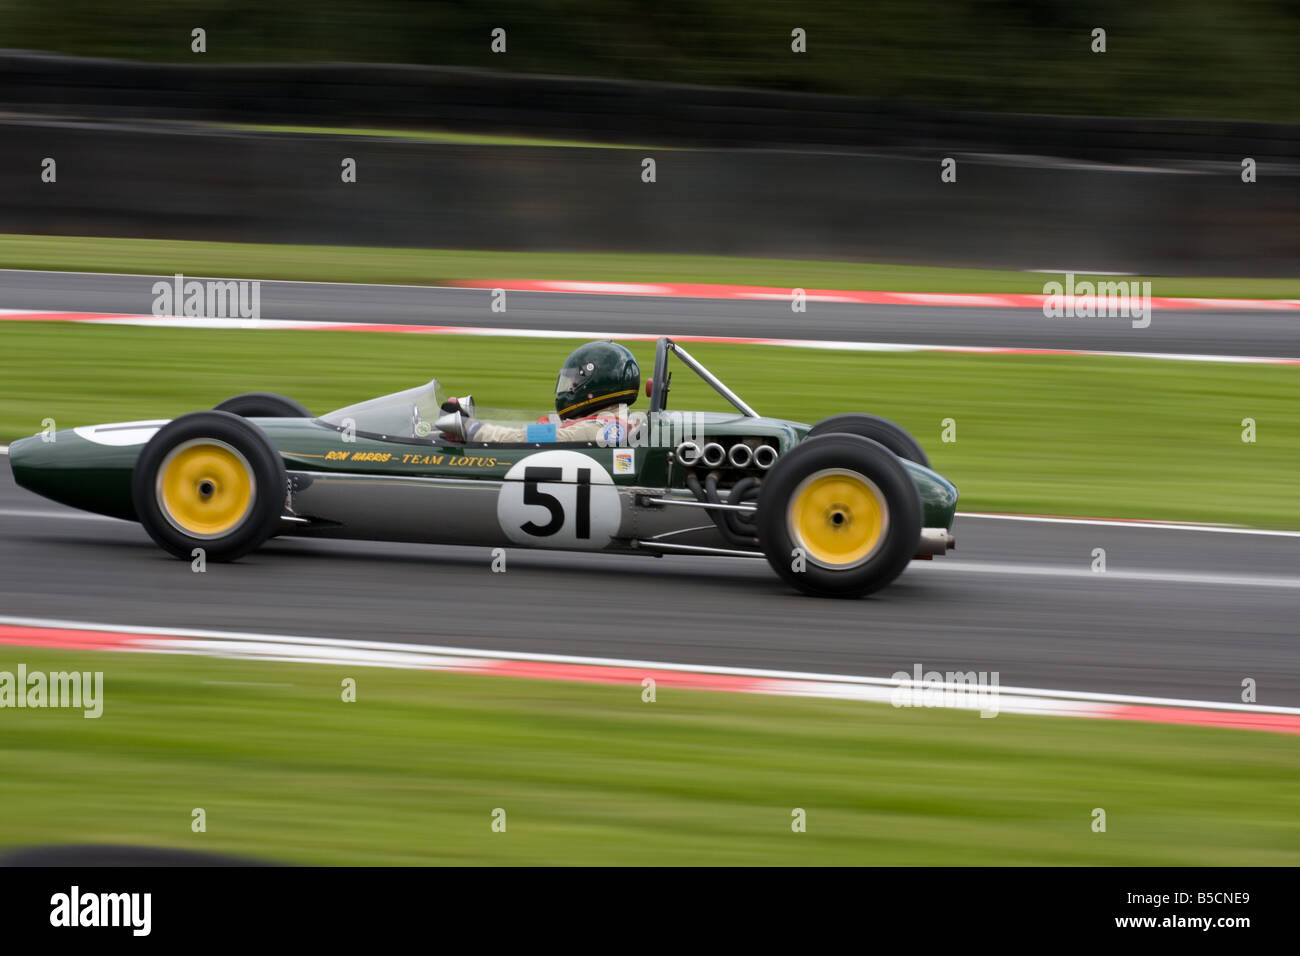 A close-up of a fast moving classic Lotus sports car. Stock Photo